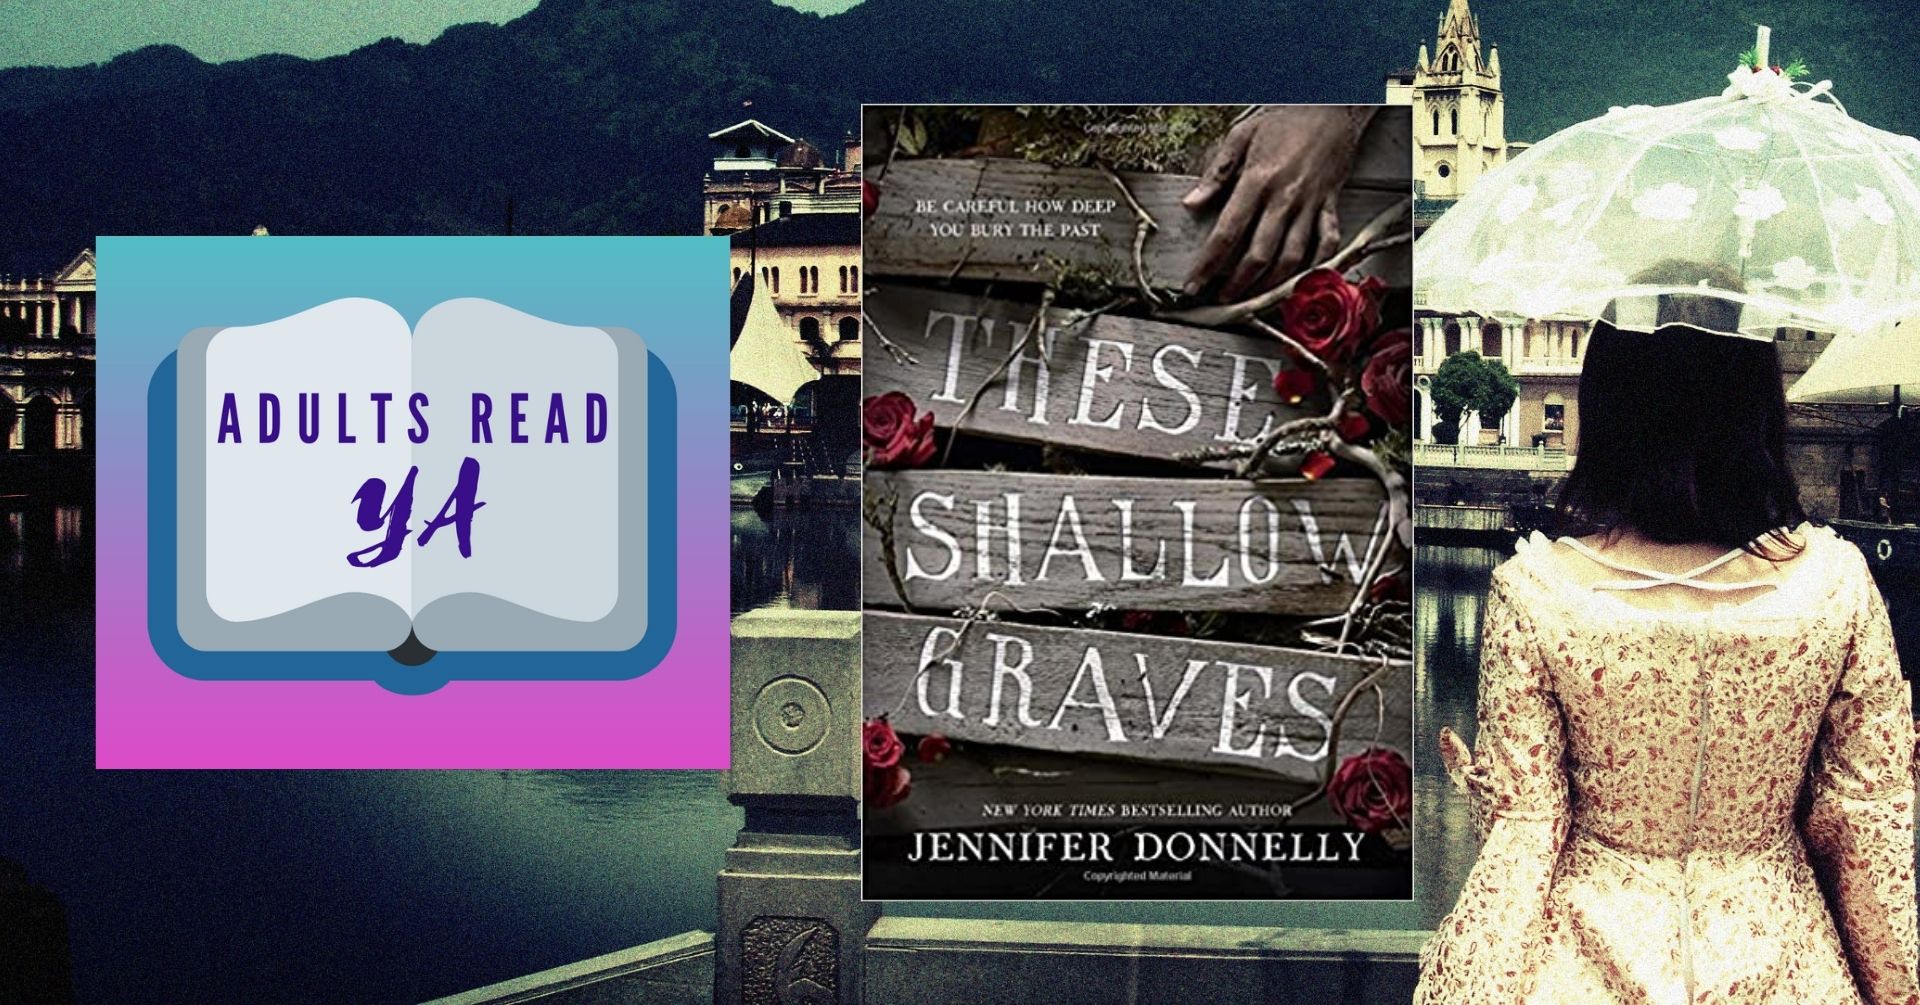 Adults Read YA: These Shallow Graves